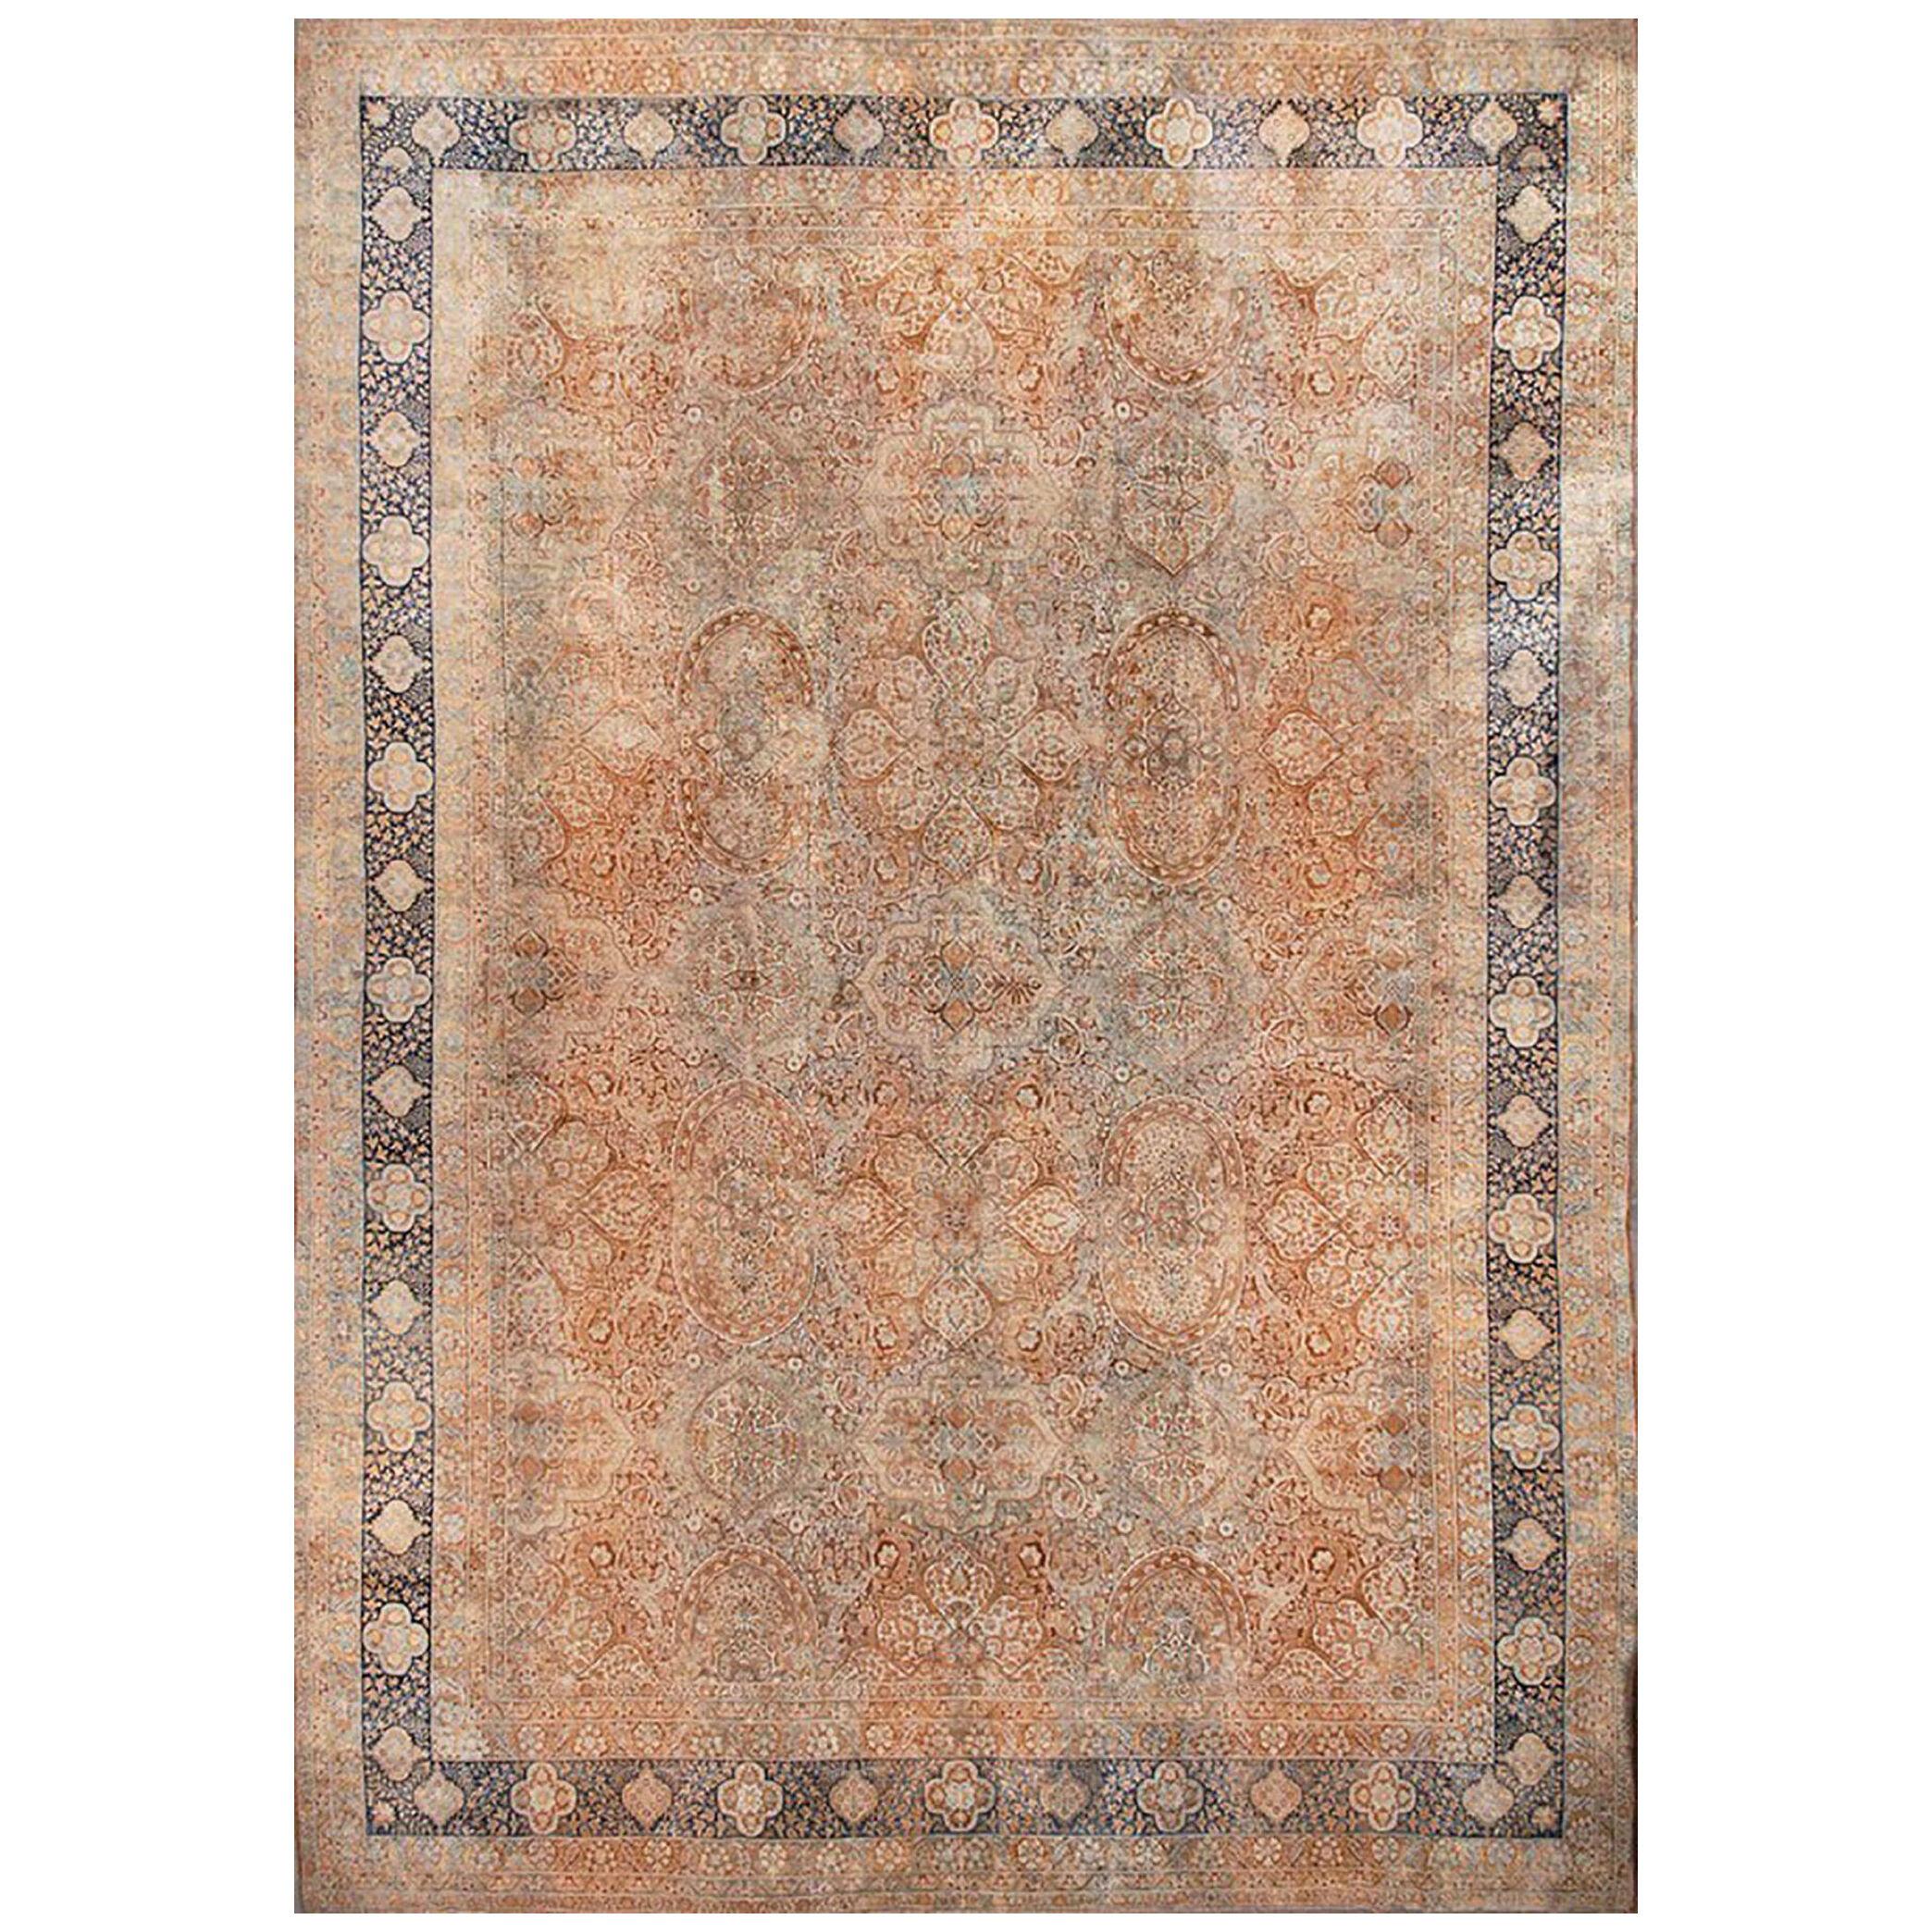 Hand-knotted Antique Kerman Persian Rug in Beige Brown All Over Geometric